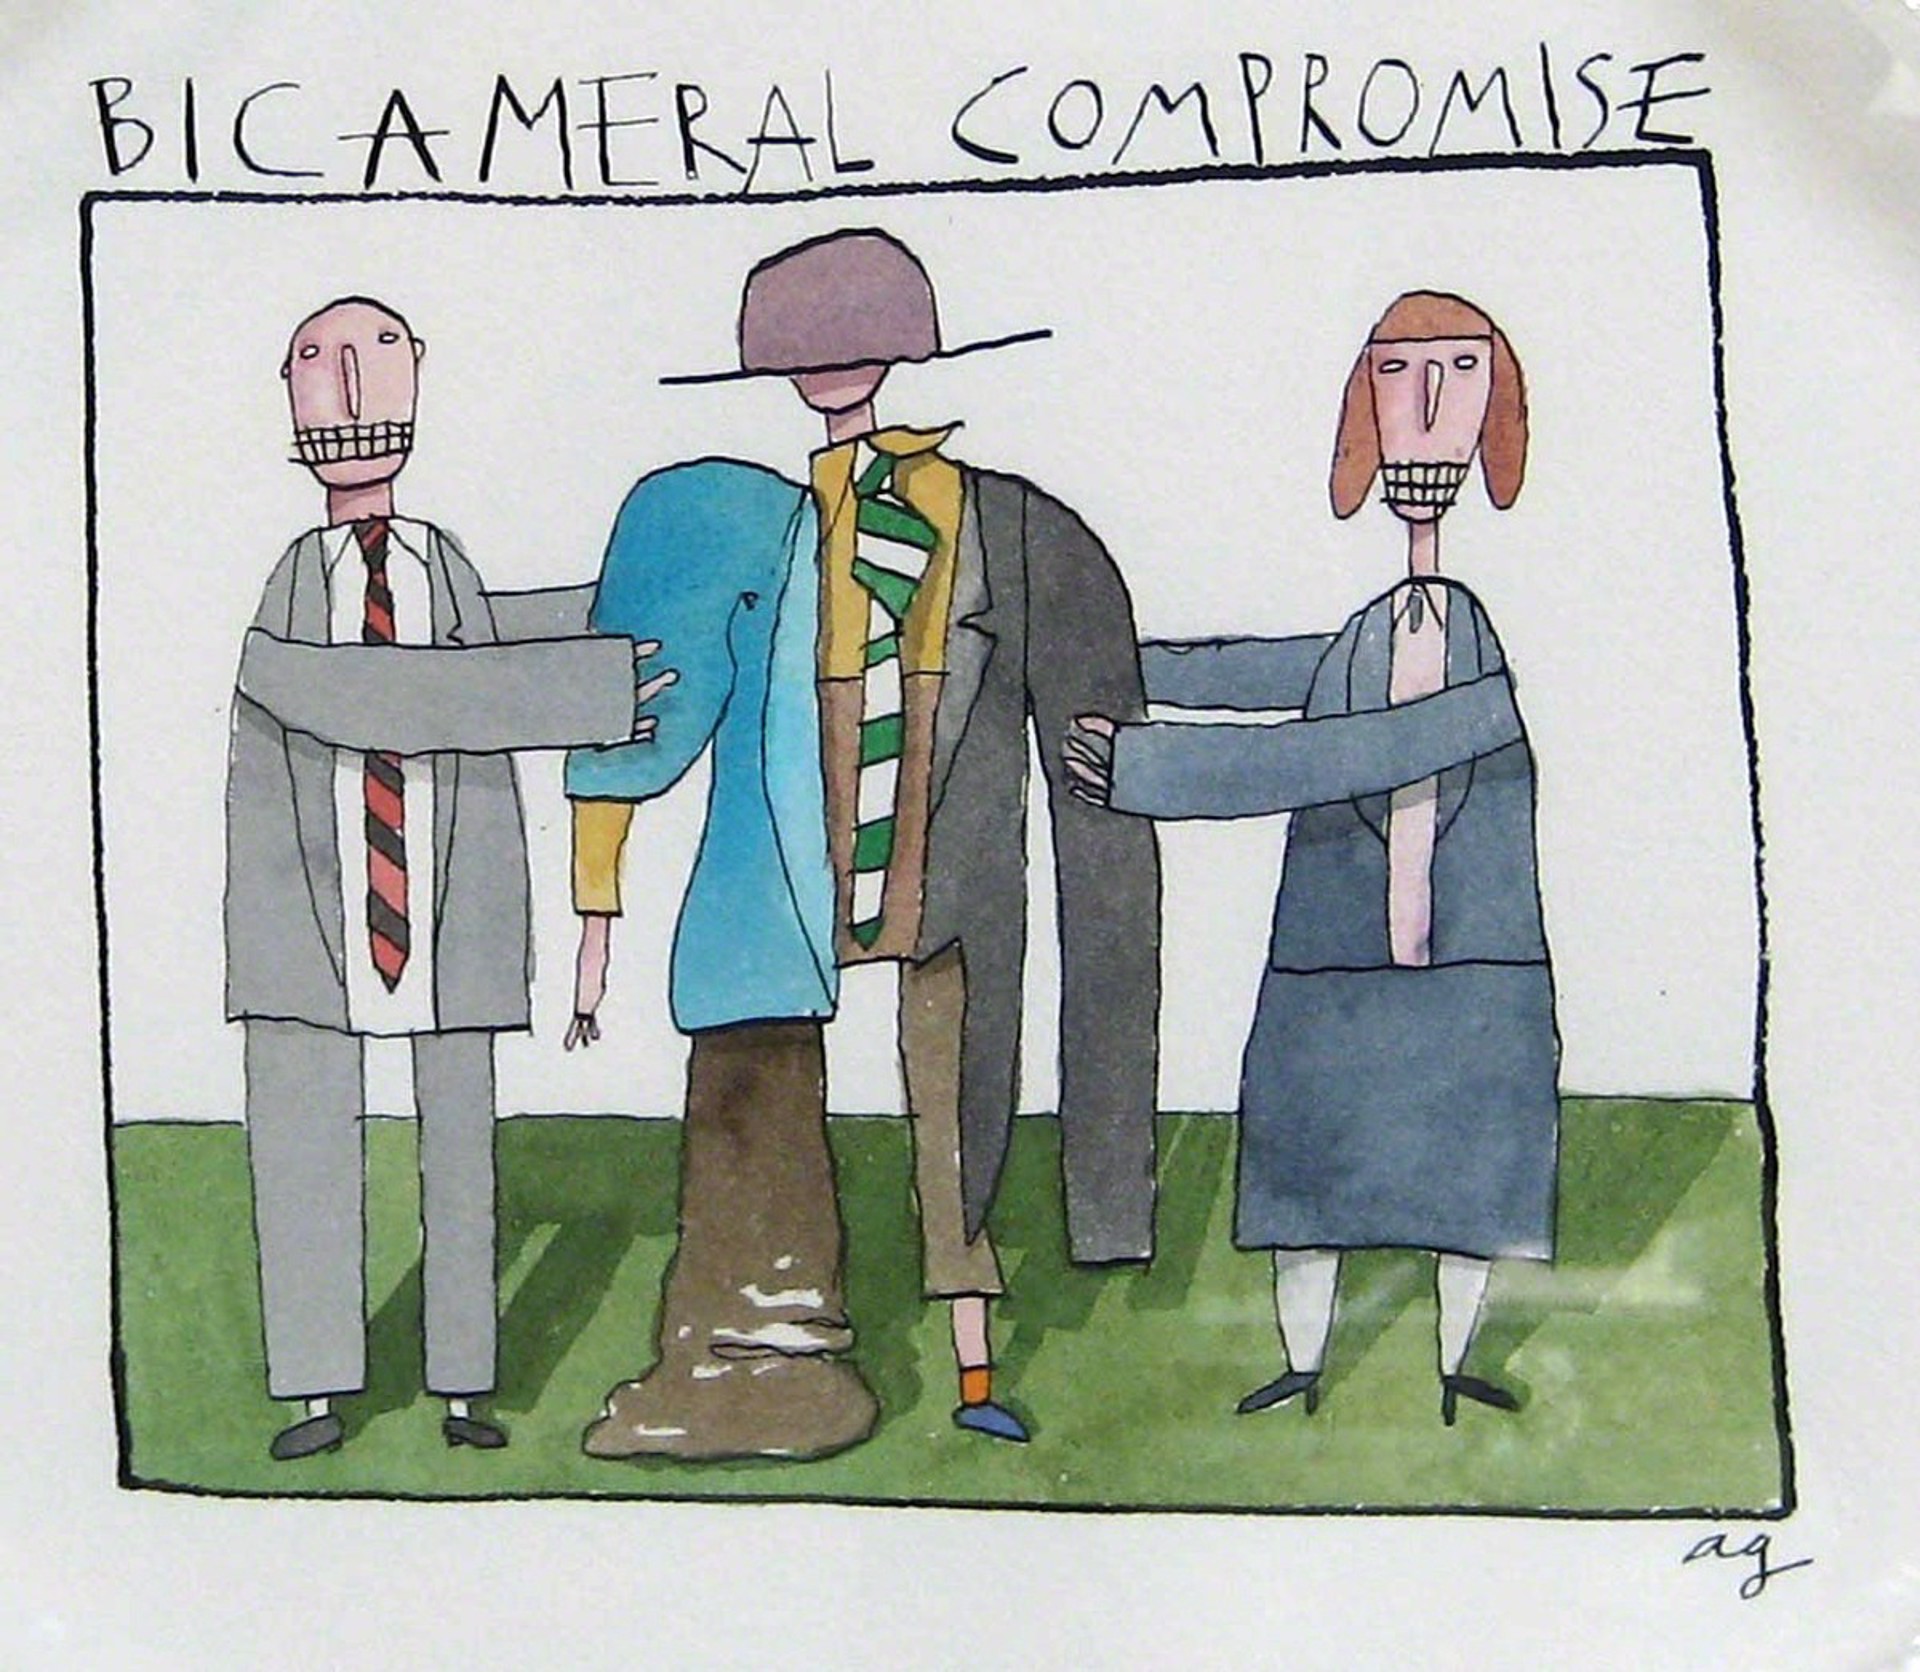 Bicameral Compromise by Alan Gerson